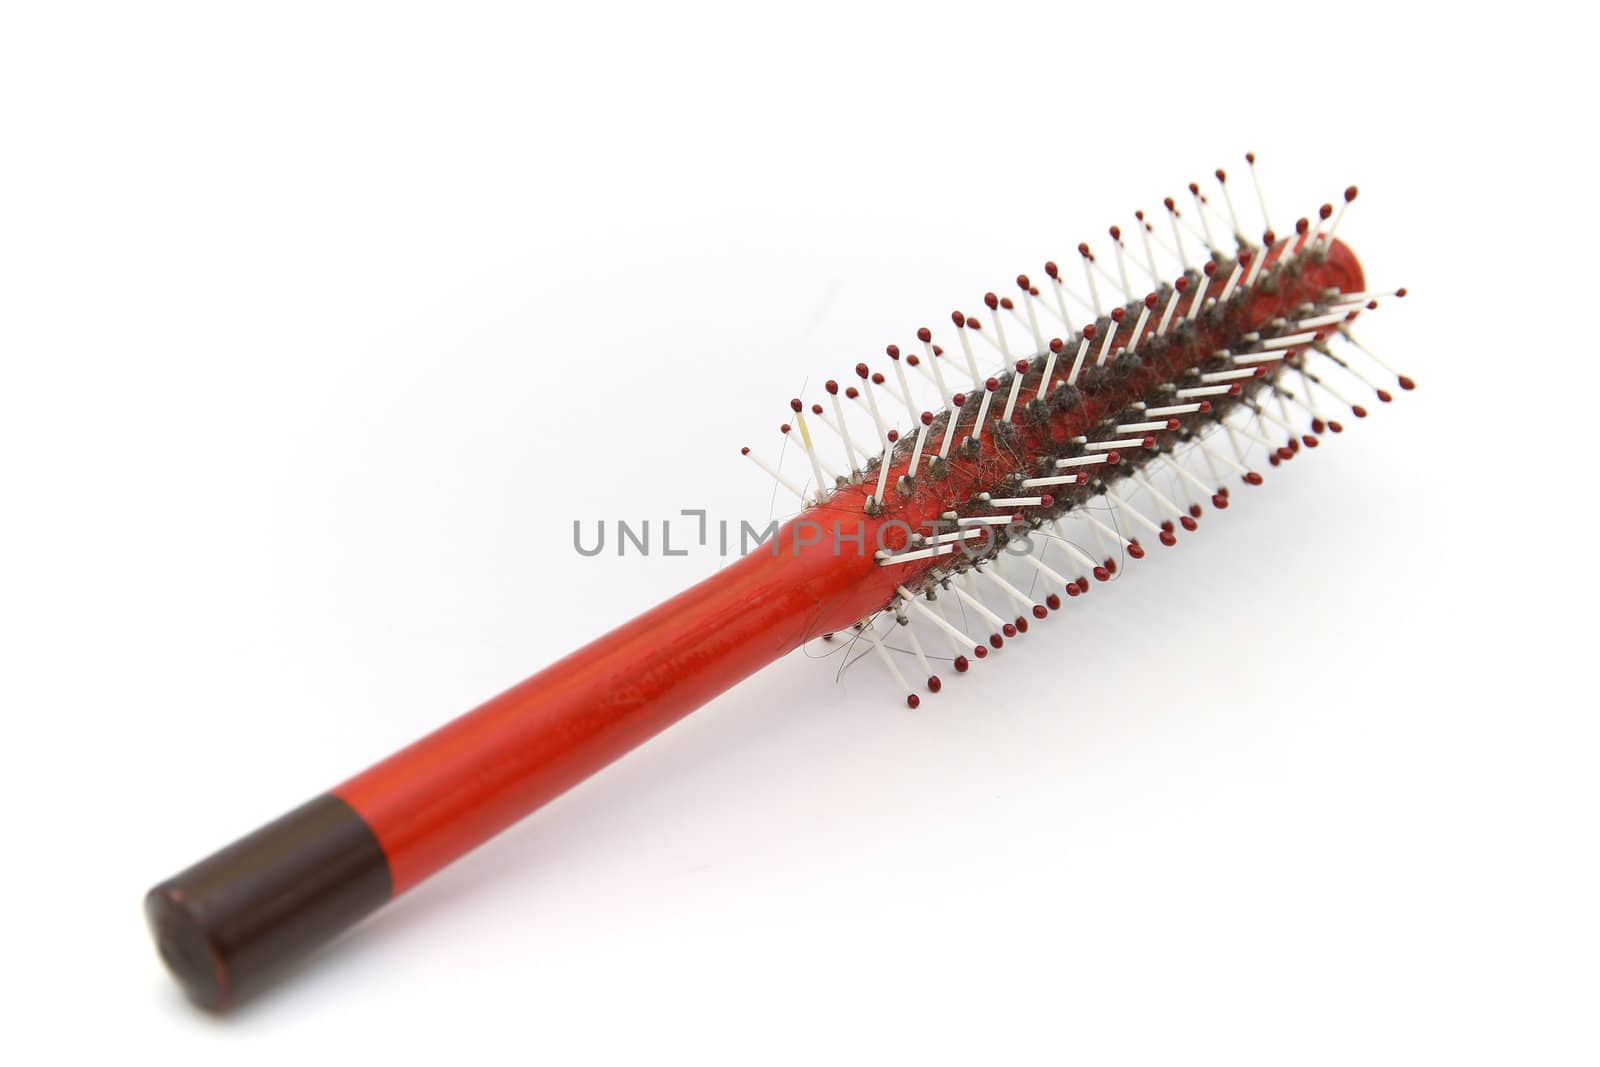 Plastic red dirty comb on white background.